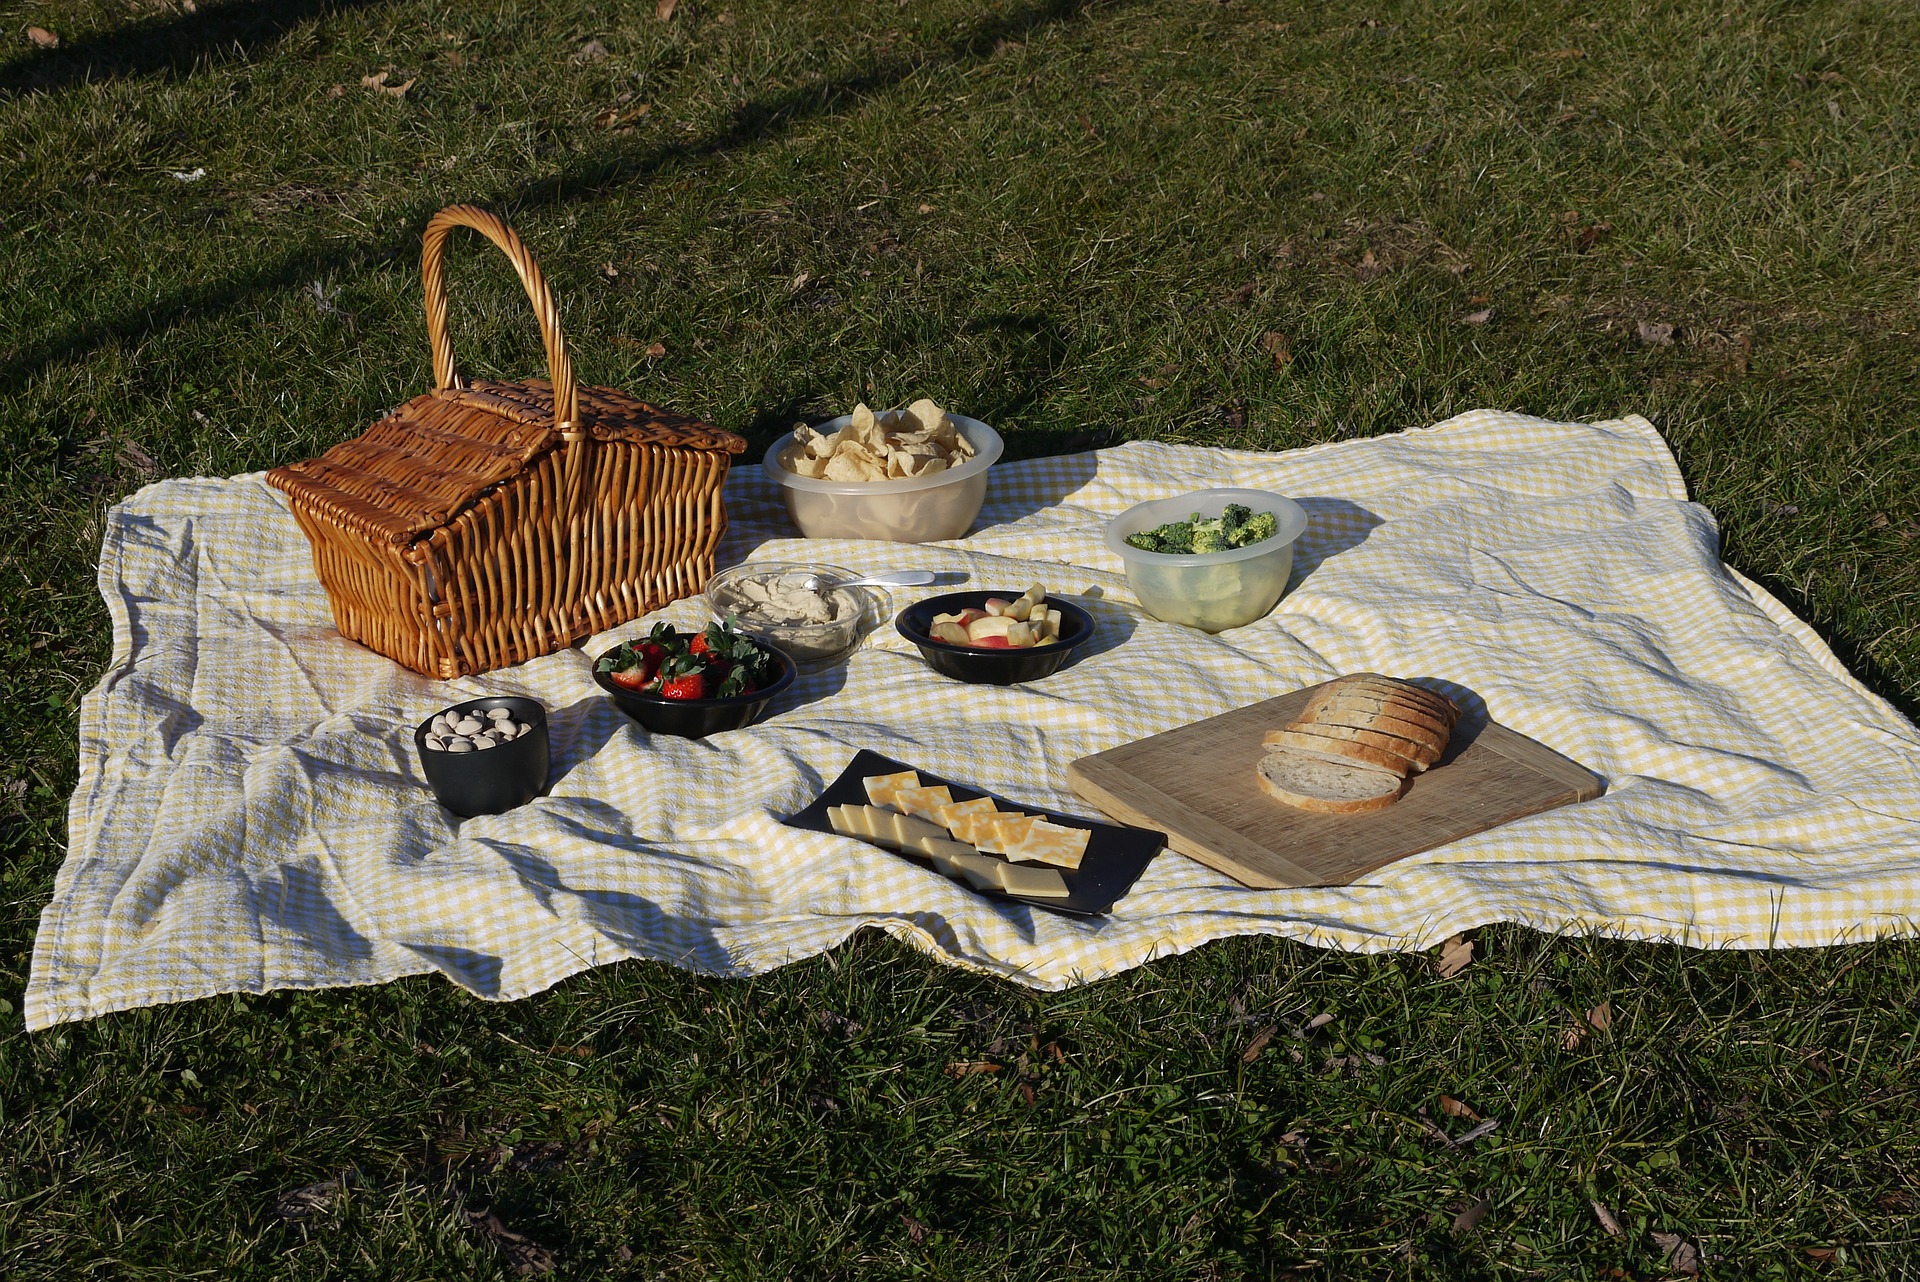 Picnic blanket from a campervan on the grass